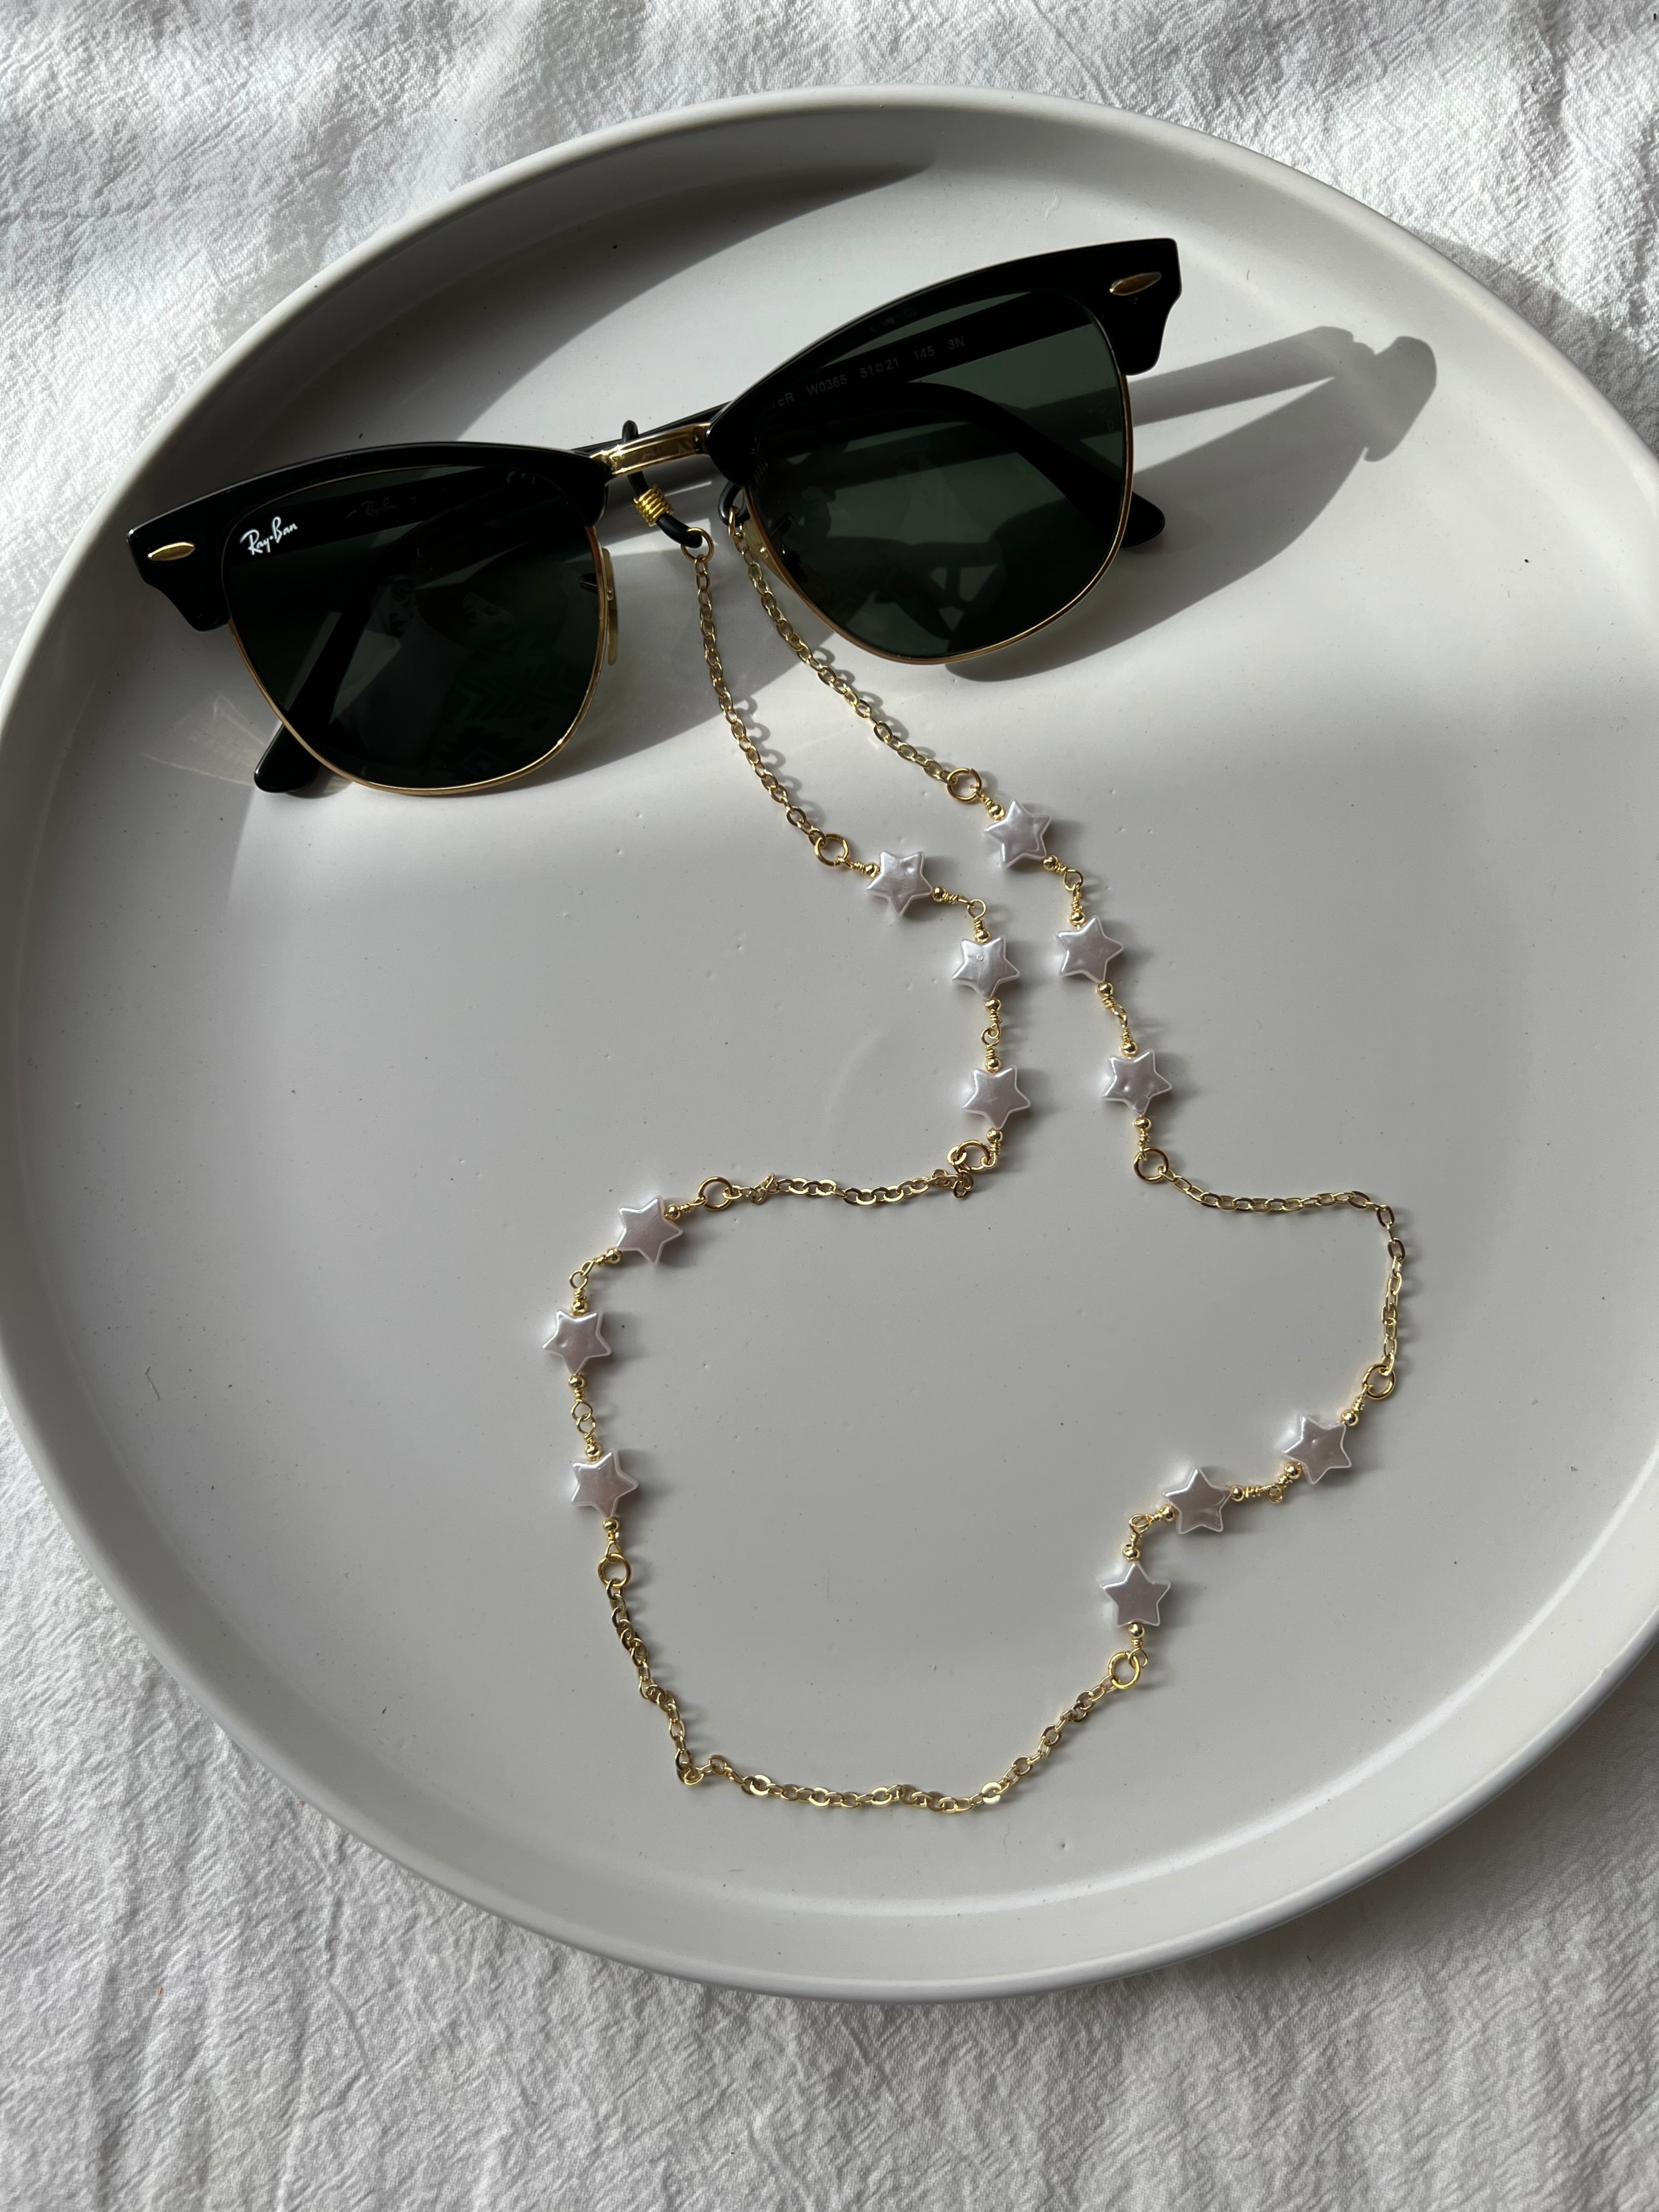 JEWELRY :: Glasses Chains :: Stars Sunglasses Chain Necklace Stainless  Steel - Christina Christi Handmade Products